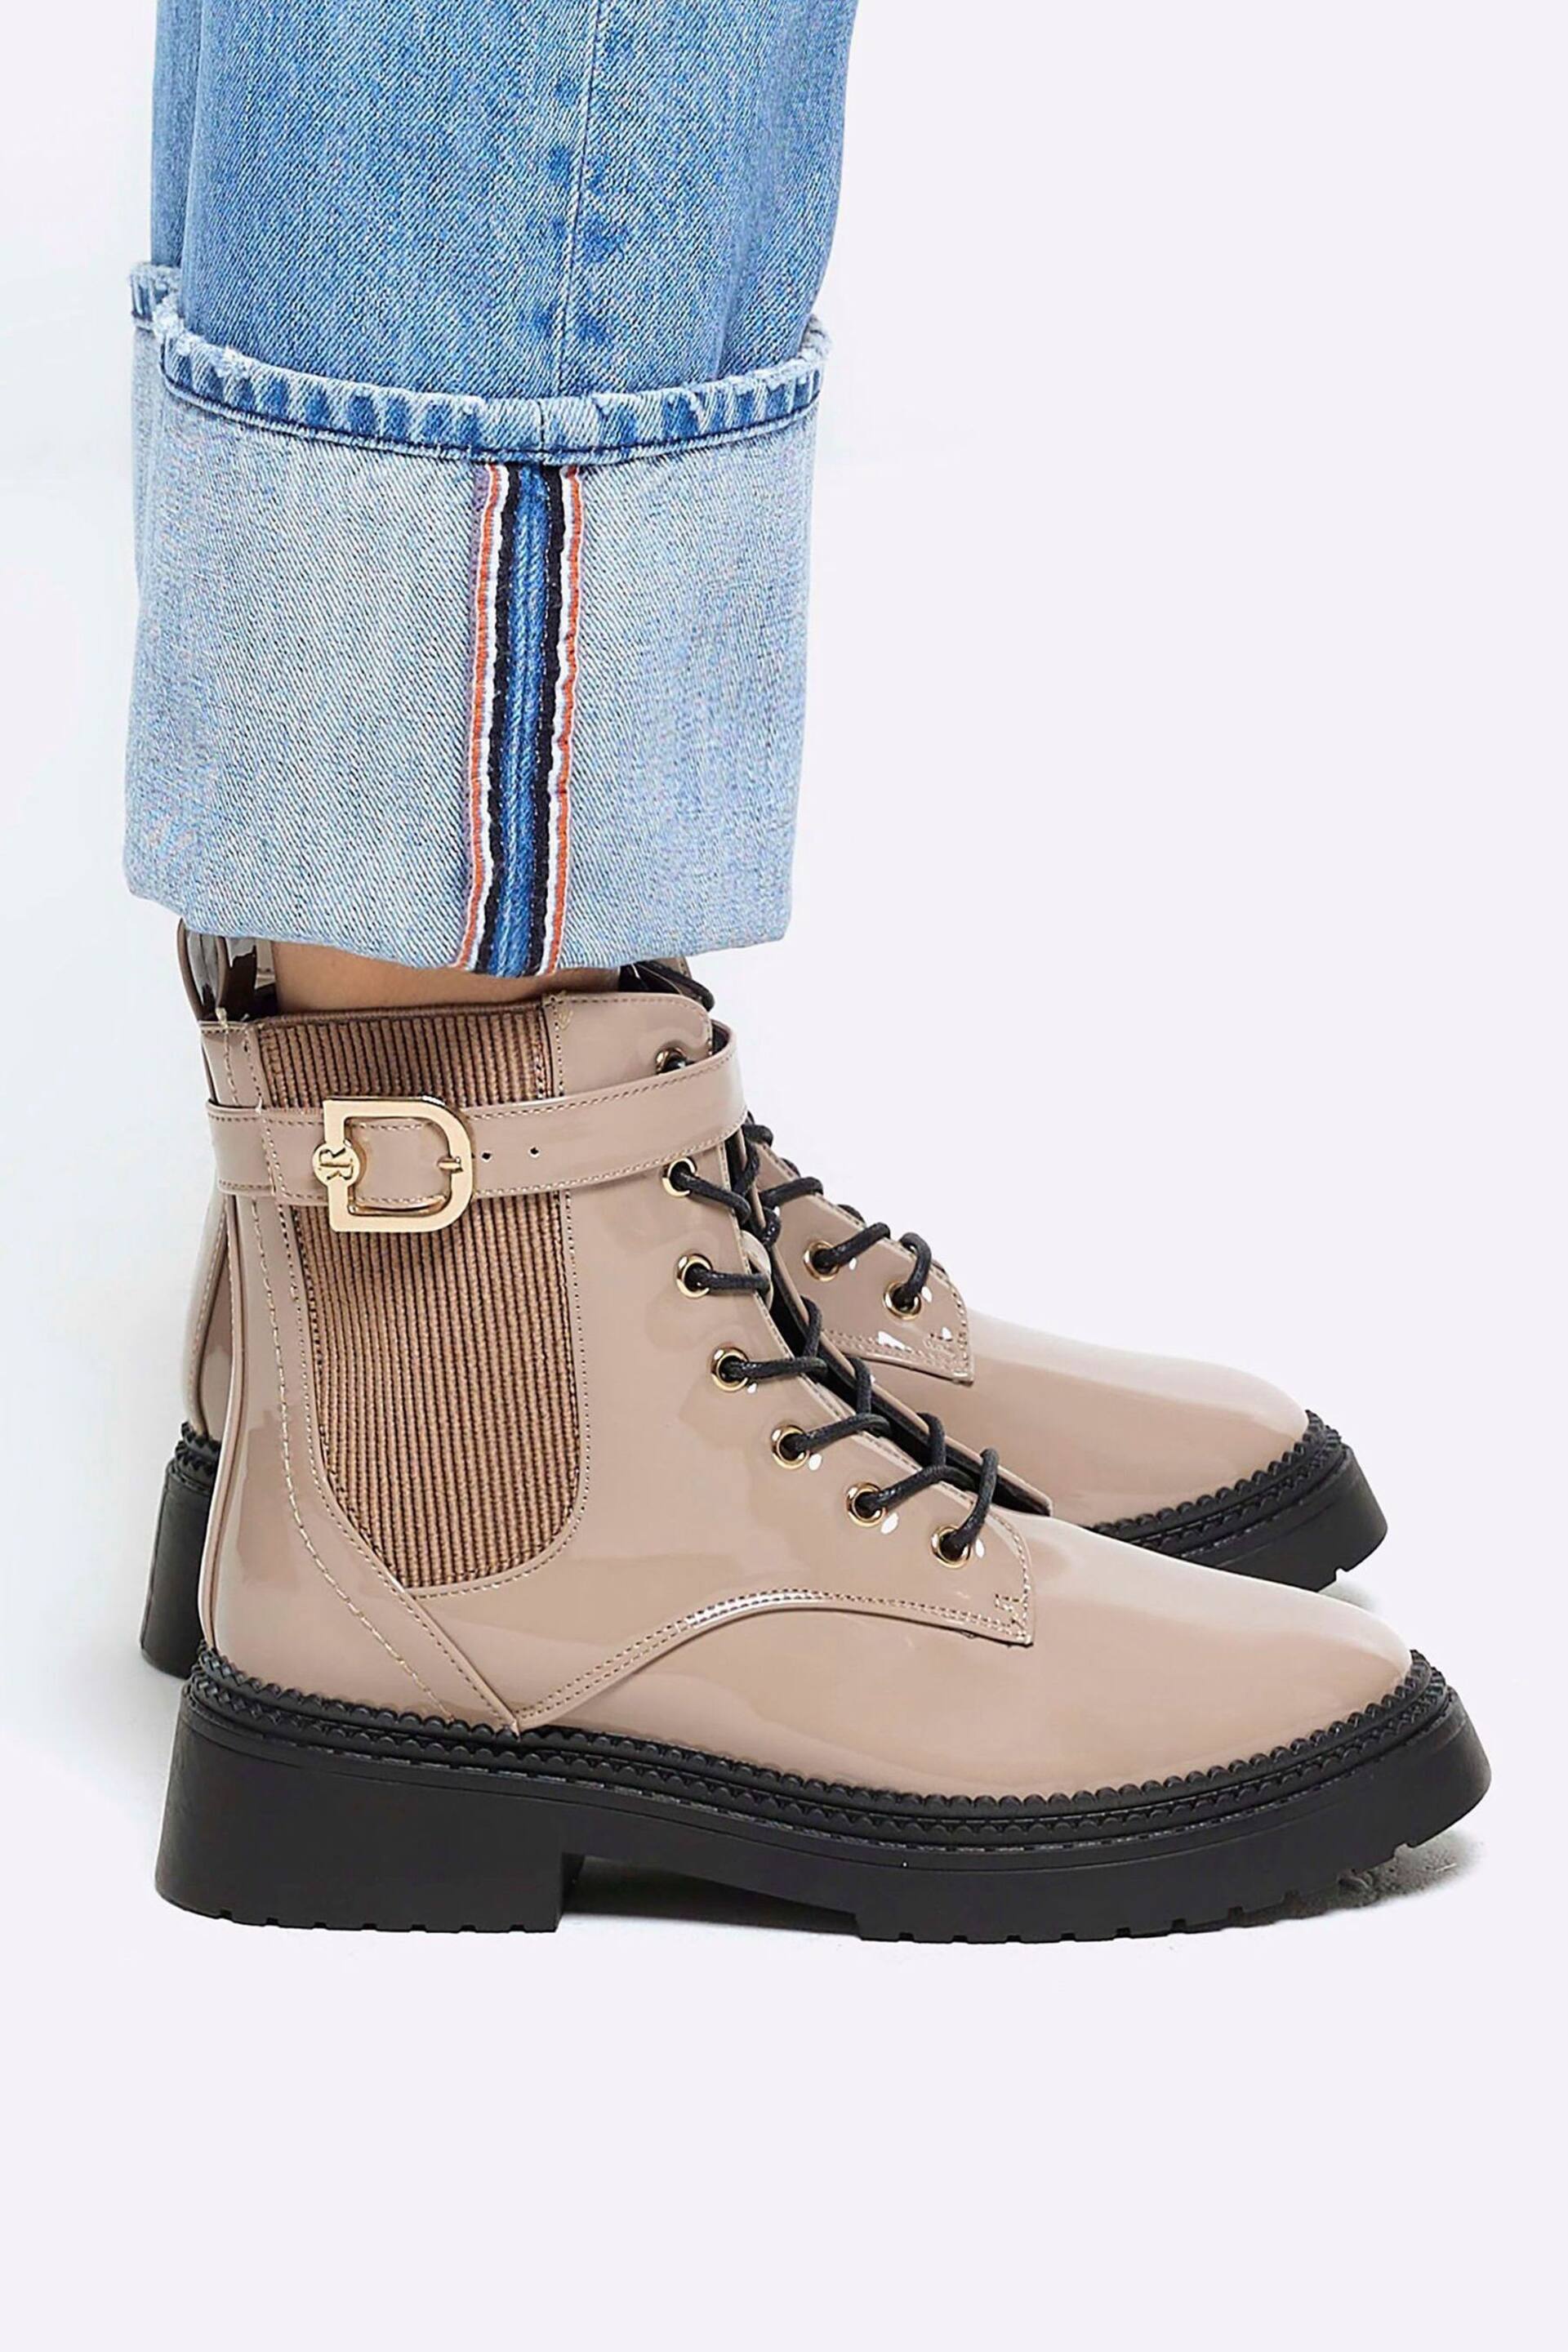 River Island Brown Lace Up Buckle Boots - Image 6 of 6